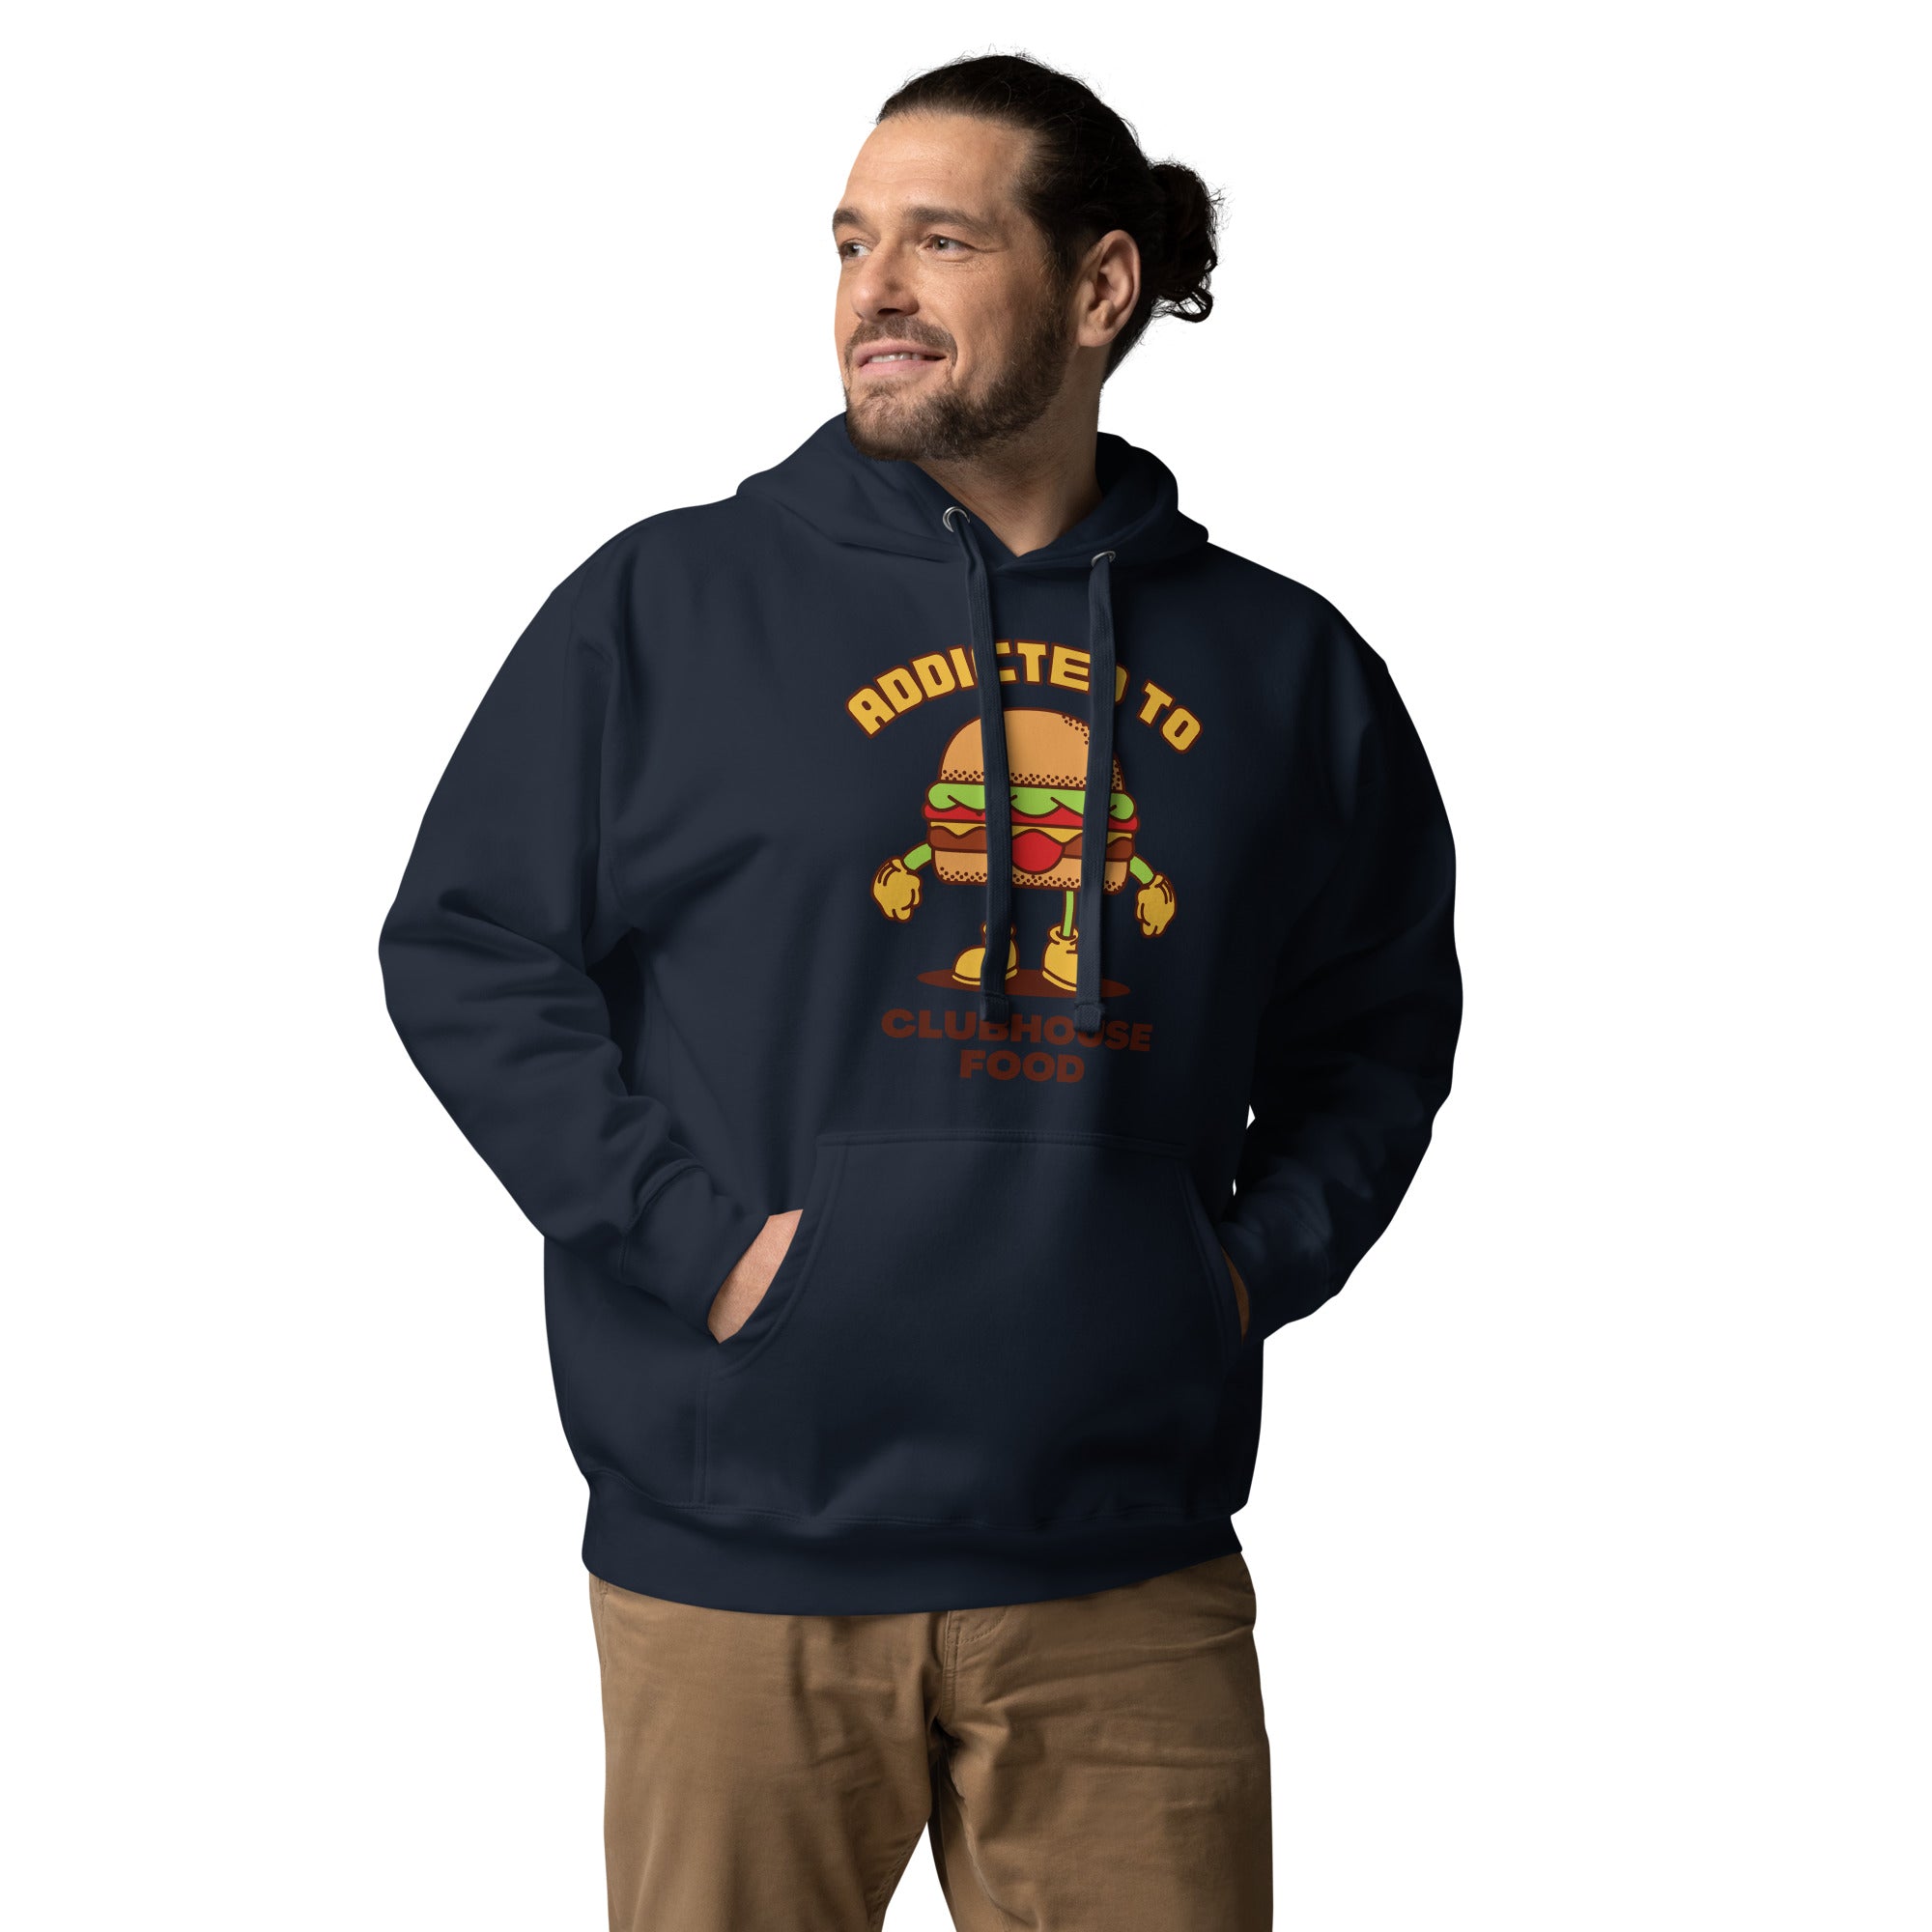 Addicted To Clubhouse Food Men's Heavy Hoodie